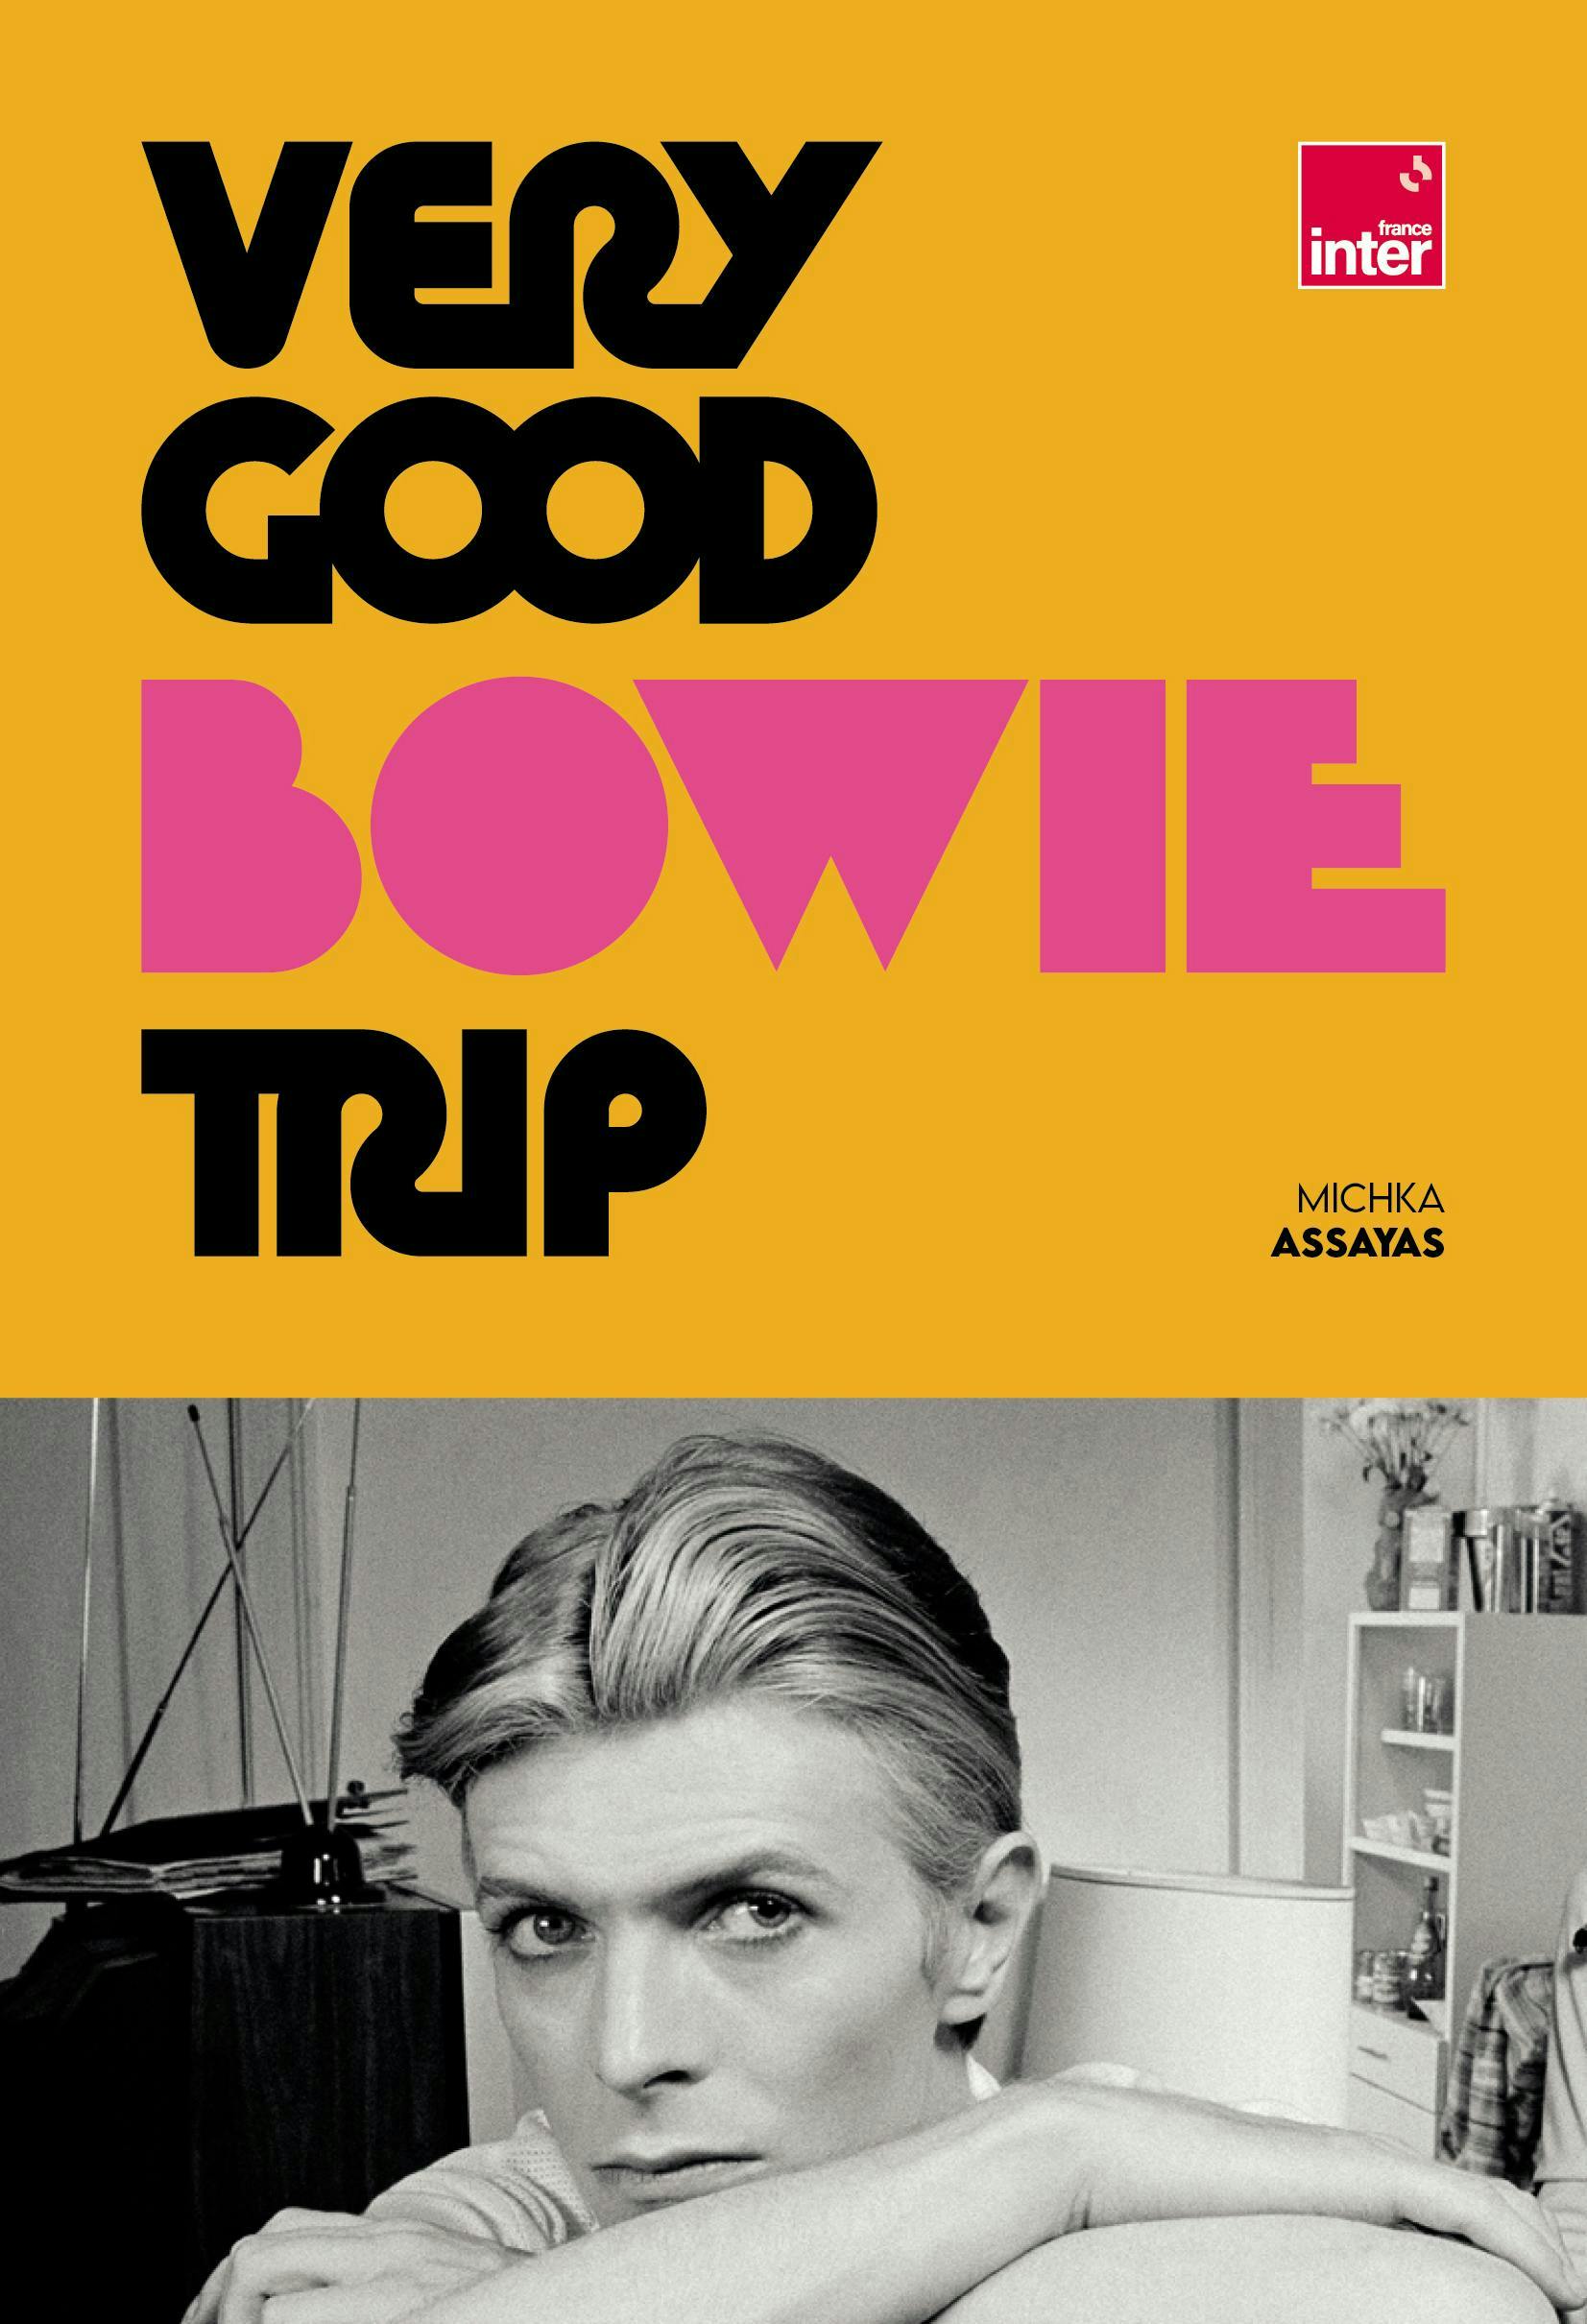 Michka Assayas : Very Good Bowie Trip (GM Editions, 176 pages, 20 €)